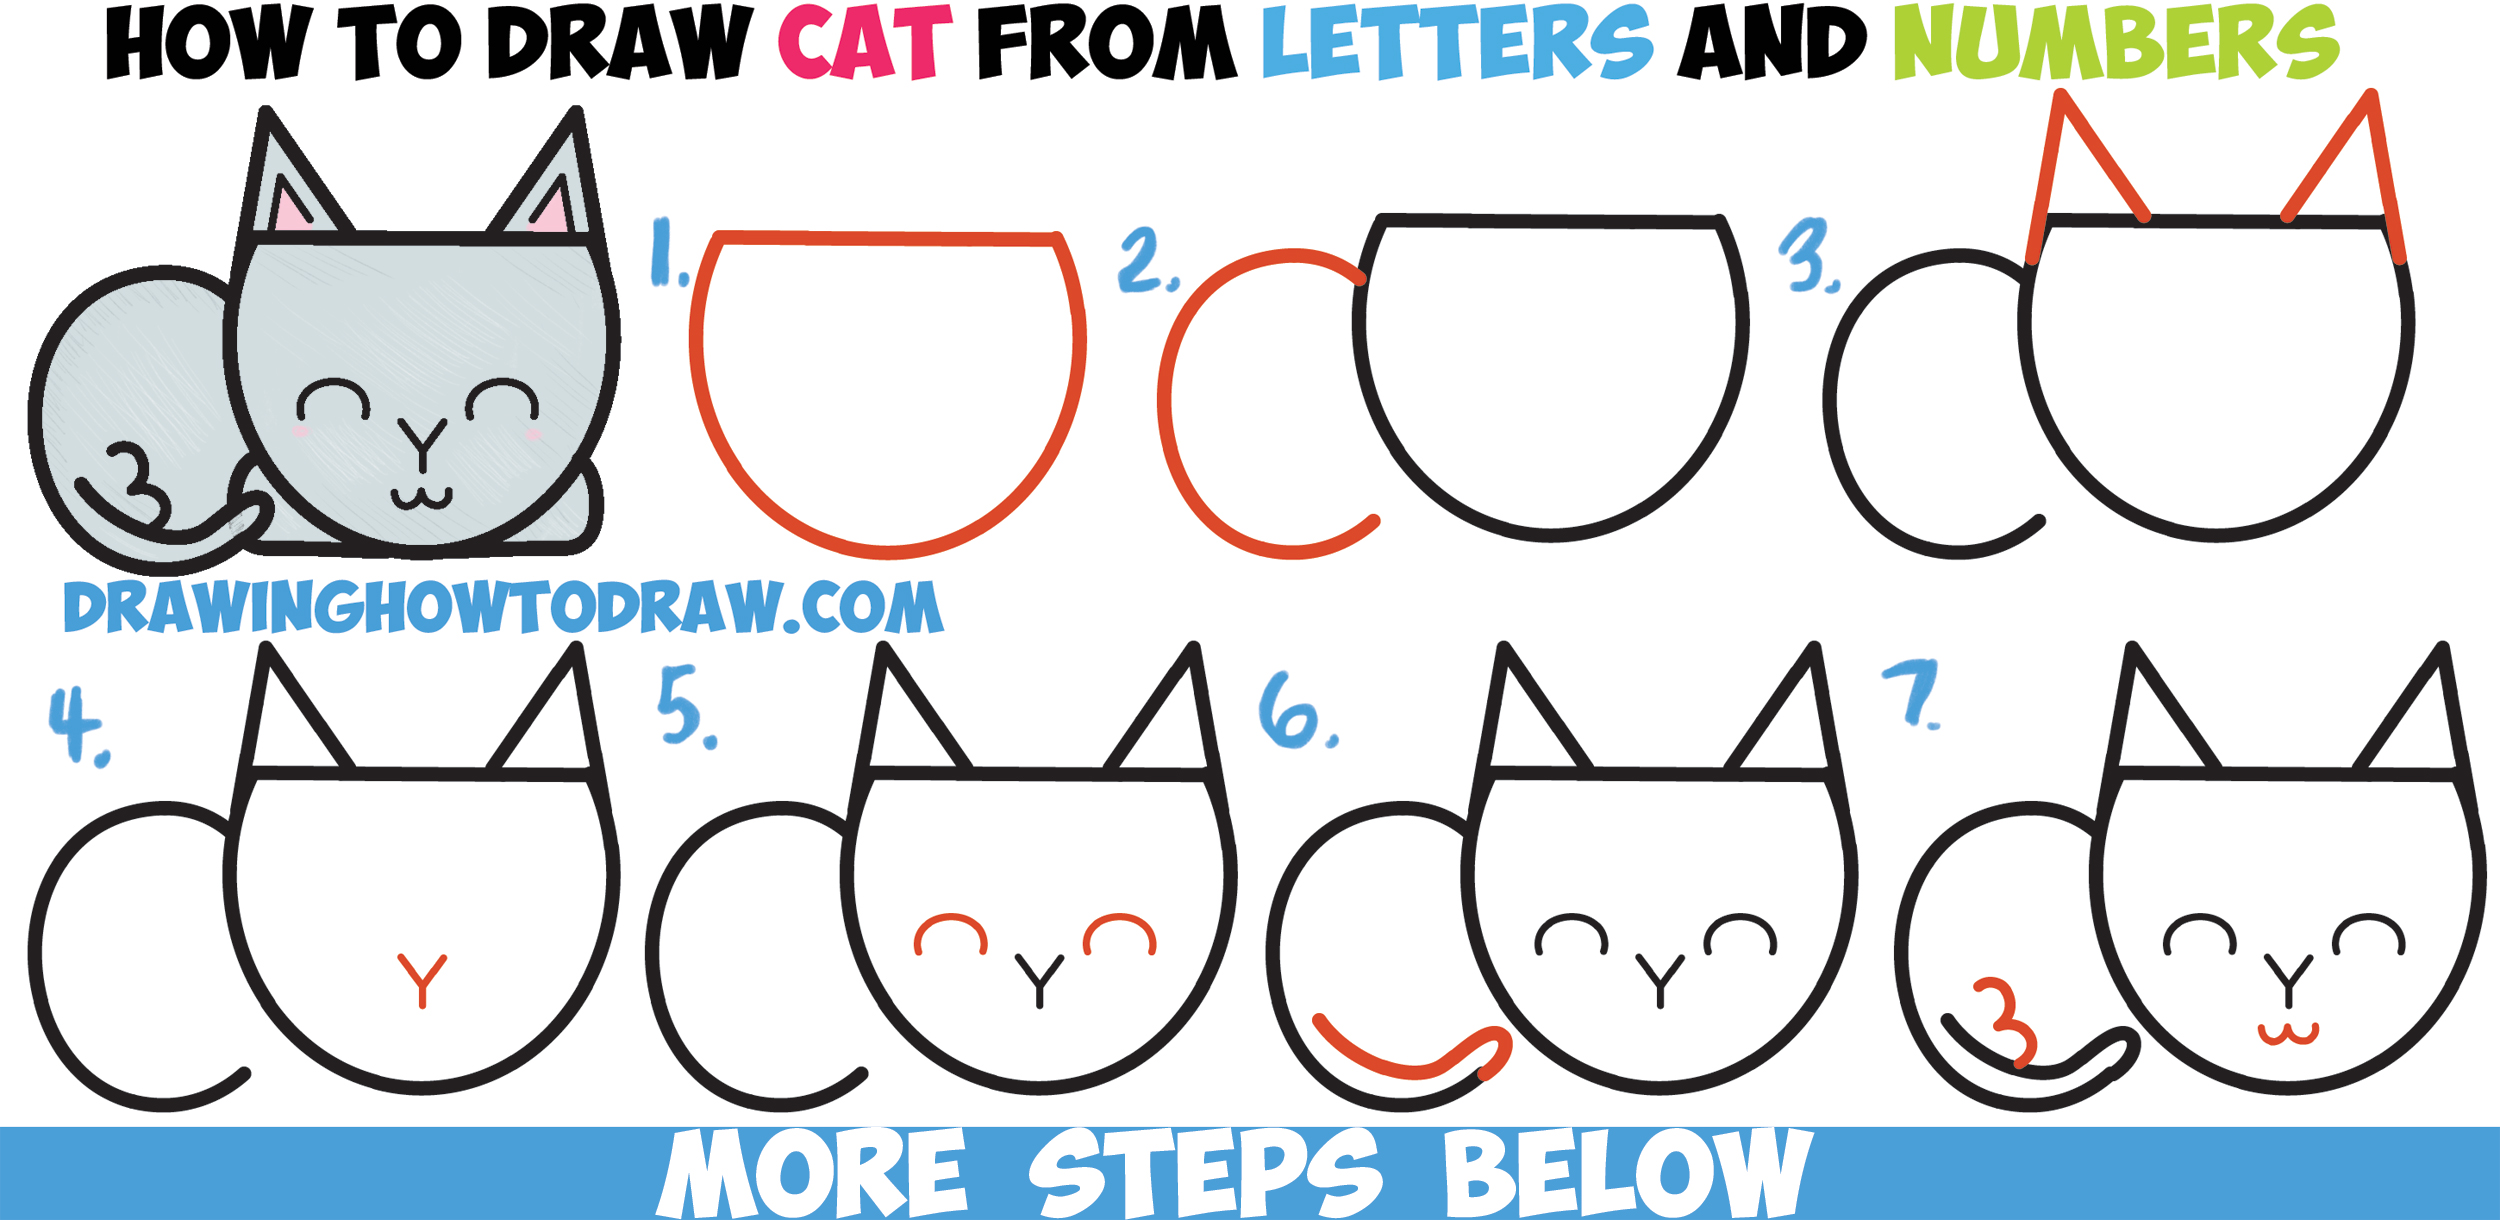 How to Draw a Cute Cartoon Cat Completely from Letters, Numbers